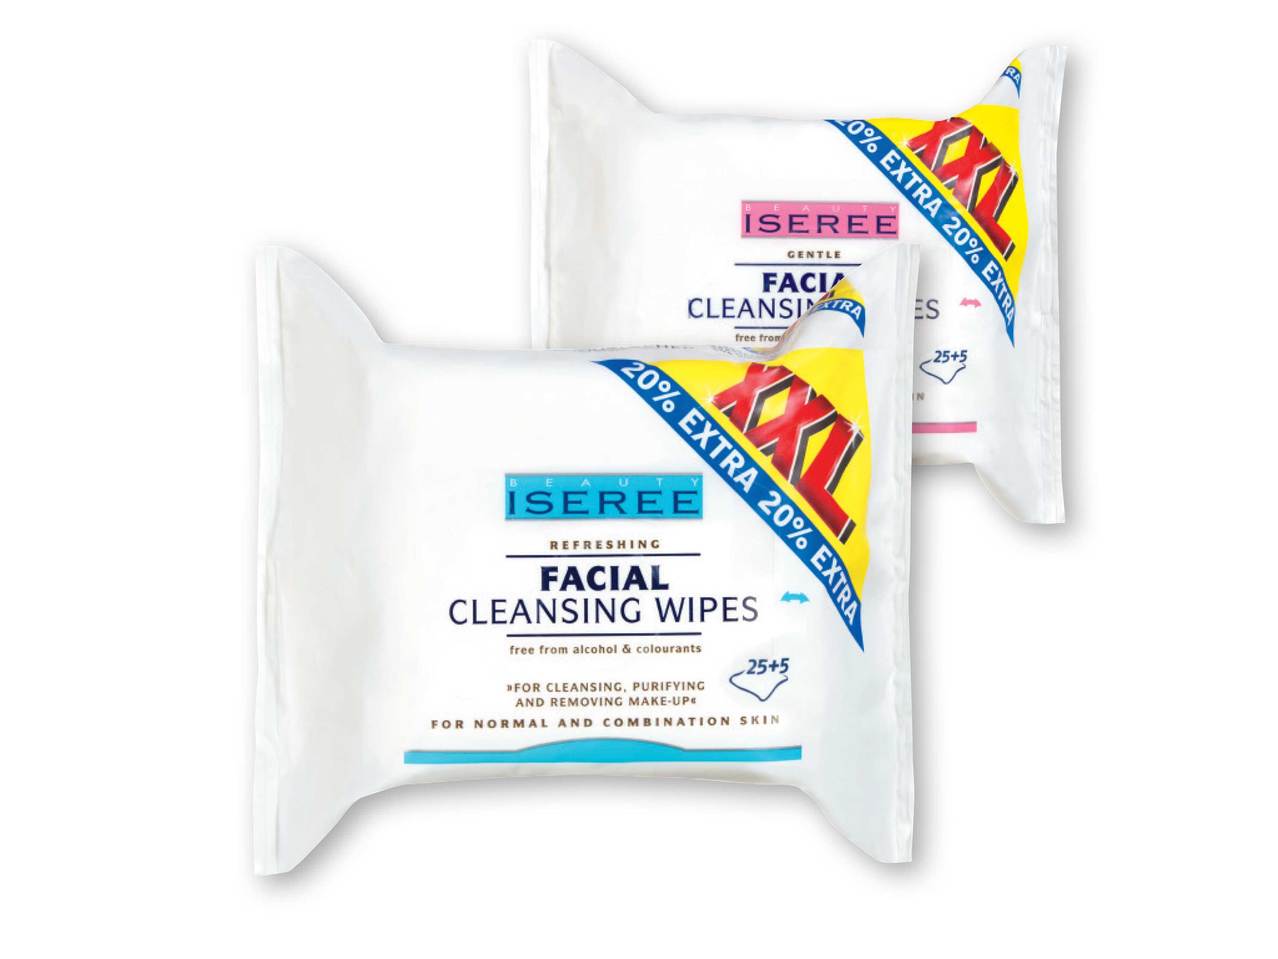 ISEREE Cleansing Facial Wipes